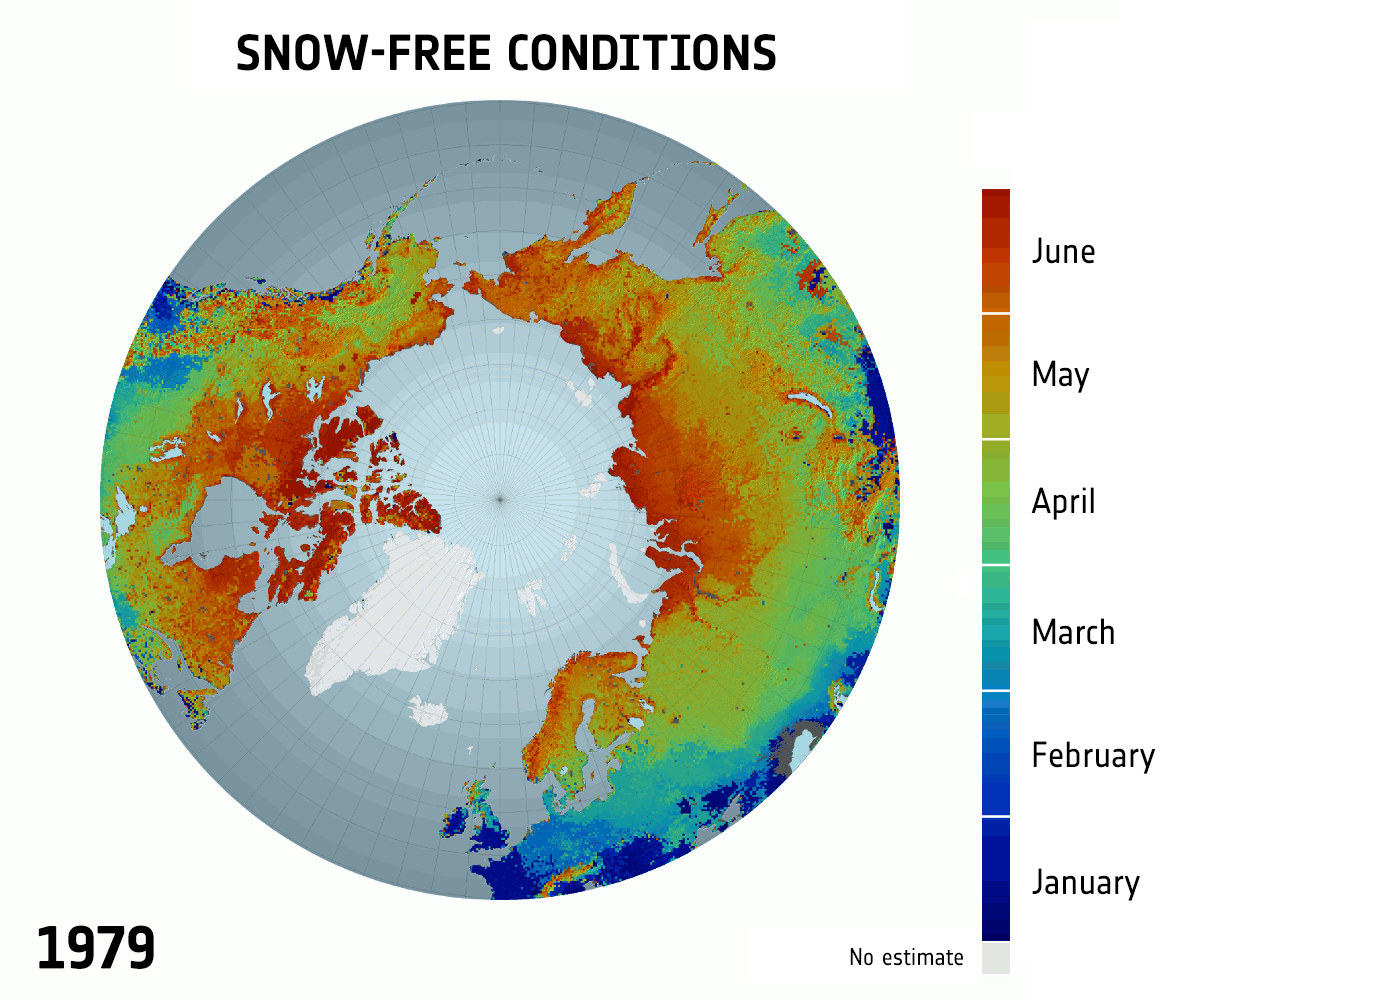 Snow-free conditions